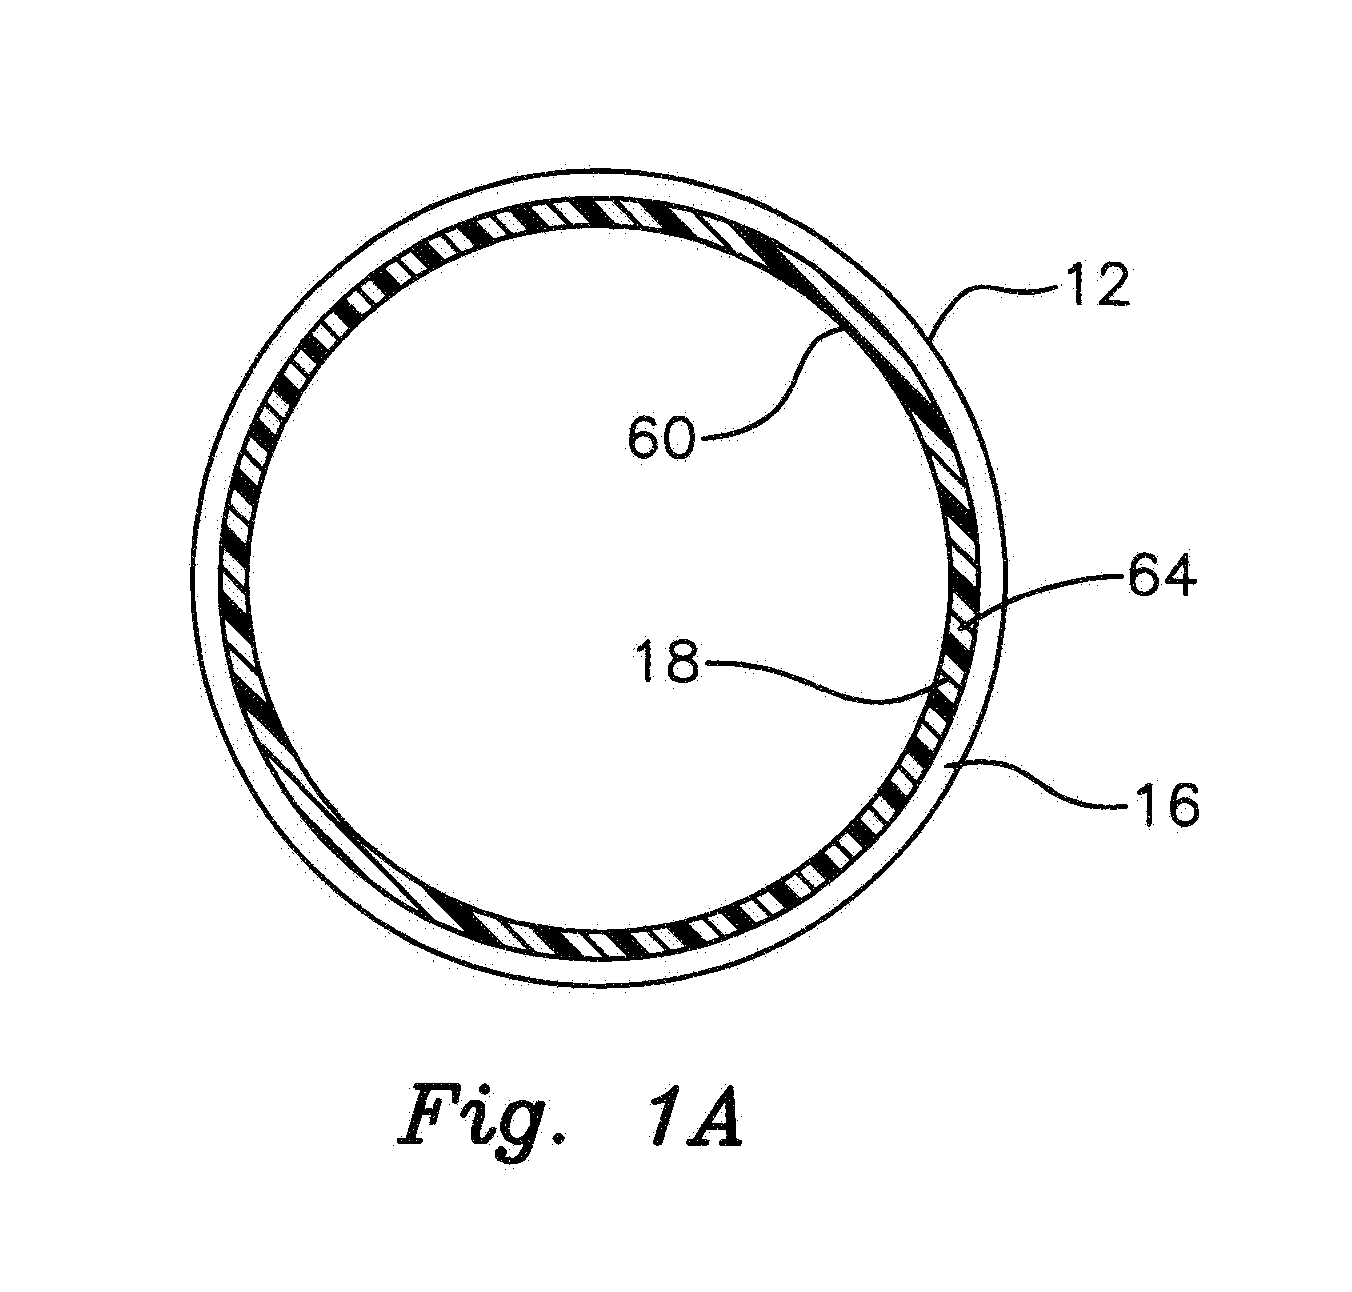 Centrifuge Tube Assembly for Separating, Concentrating and Aspirating Constituents of a Fluid Product